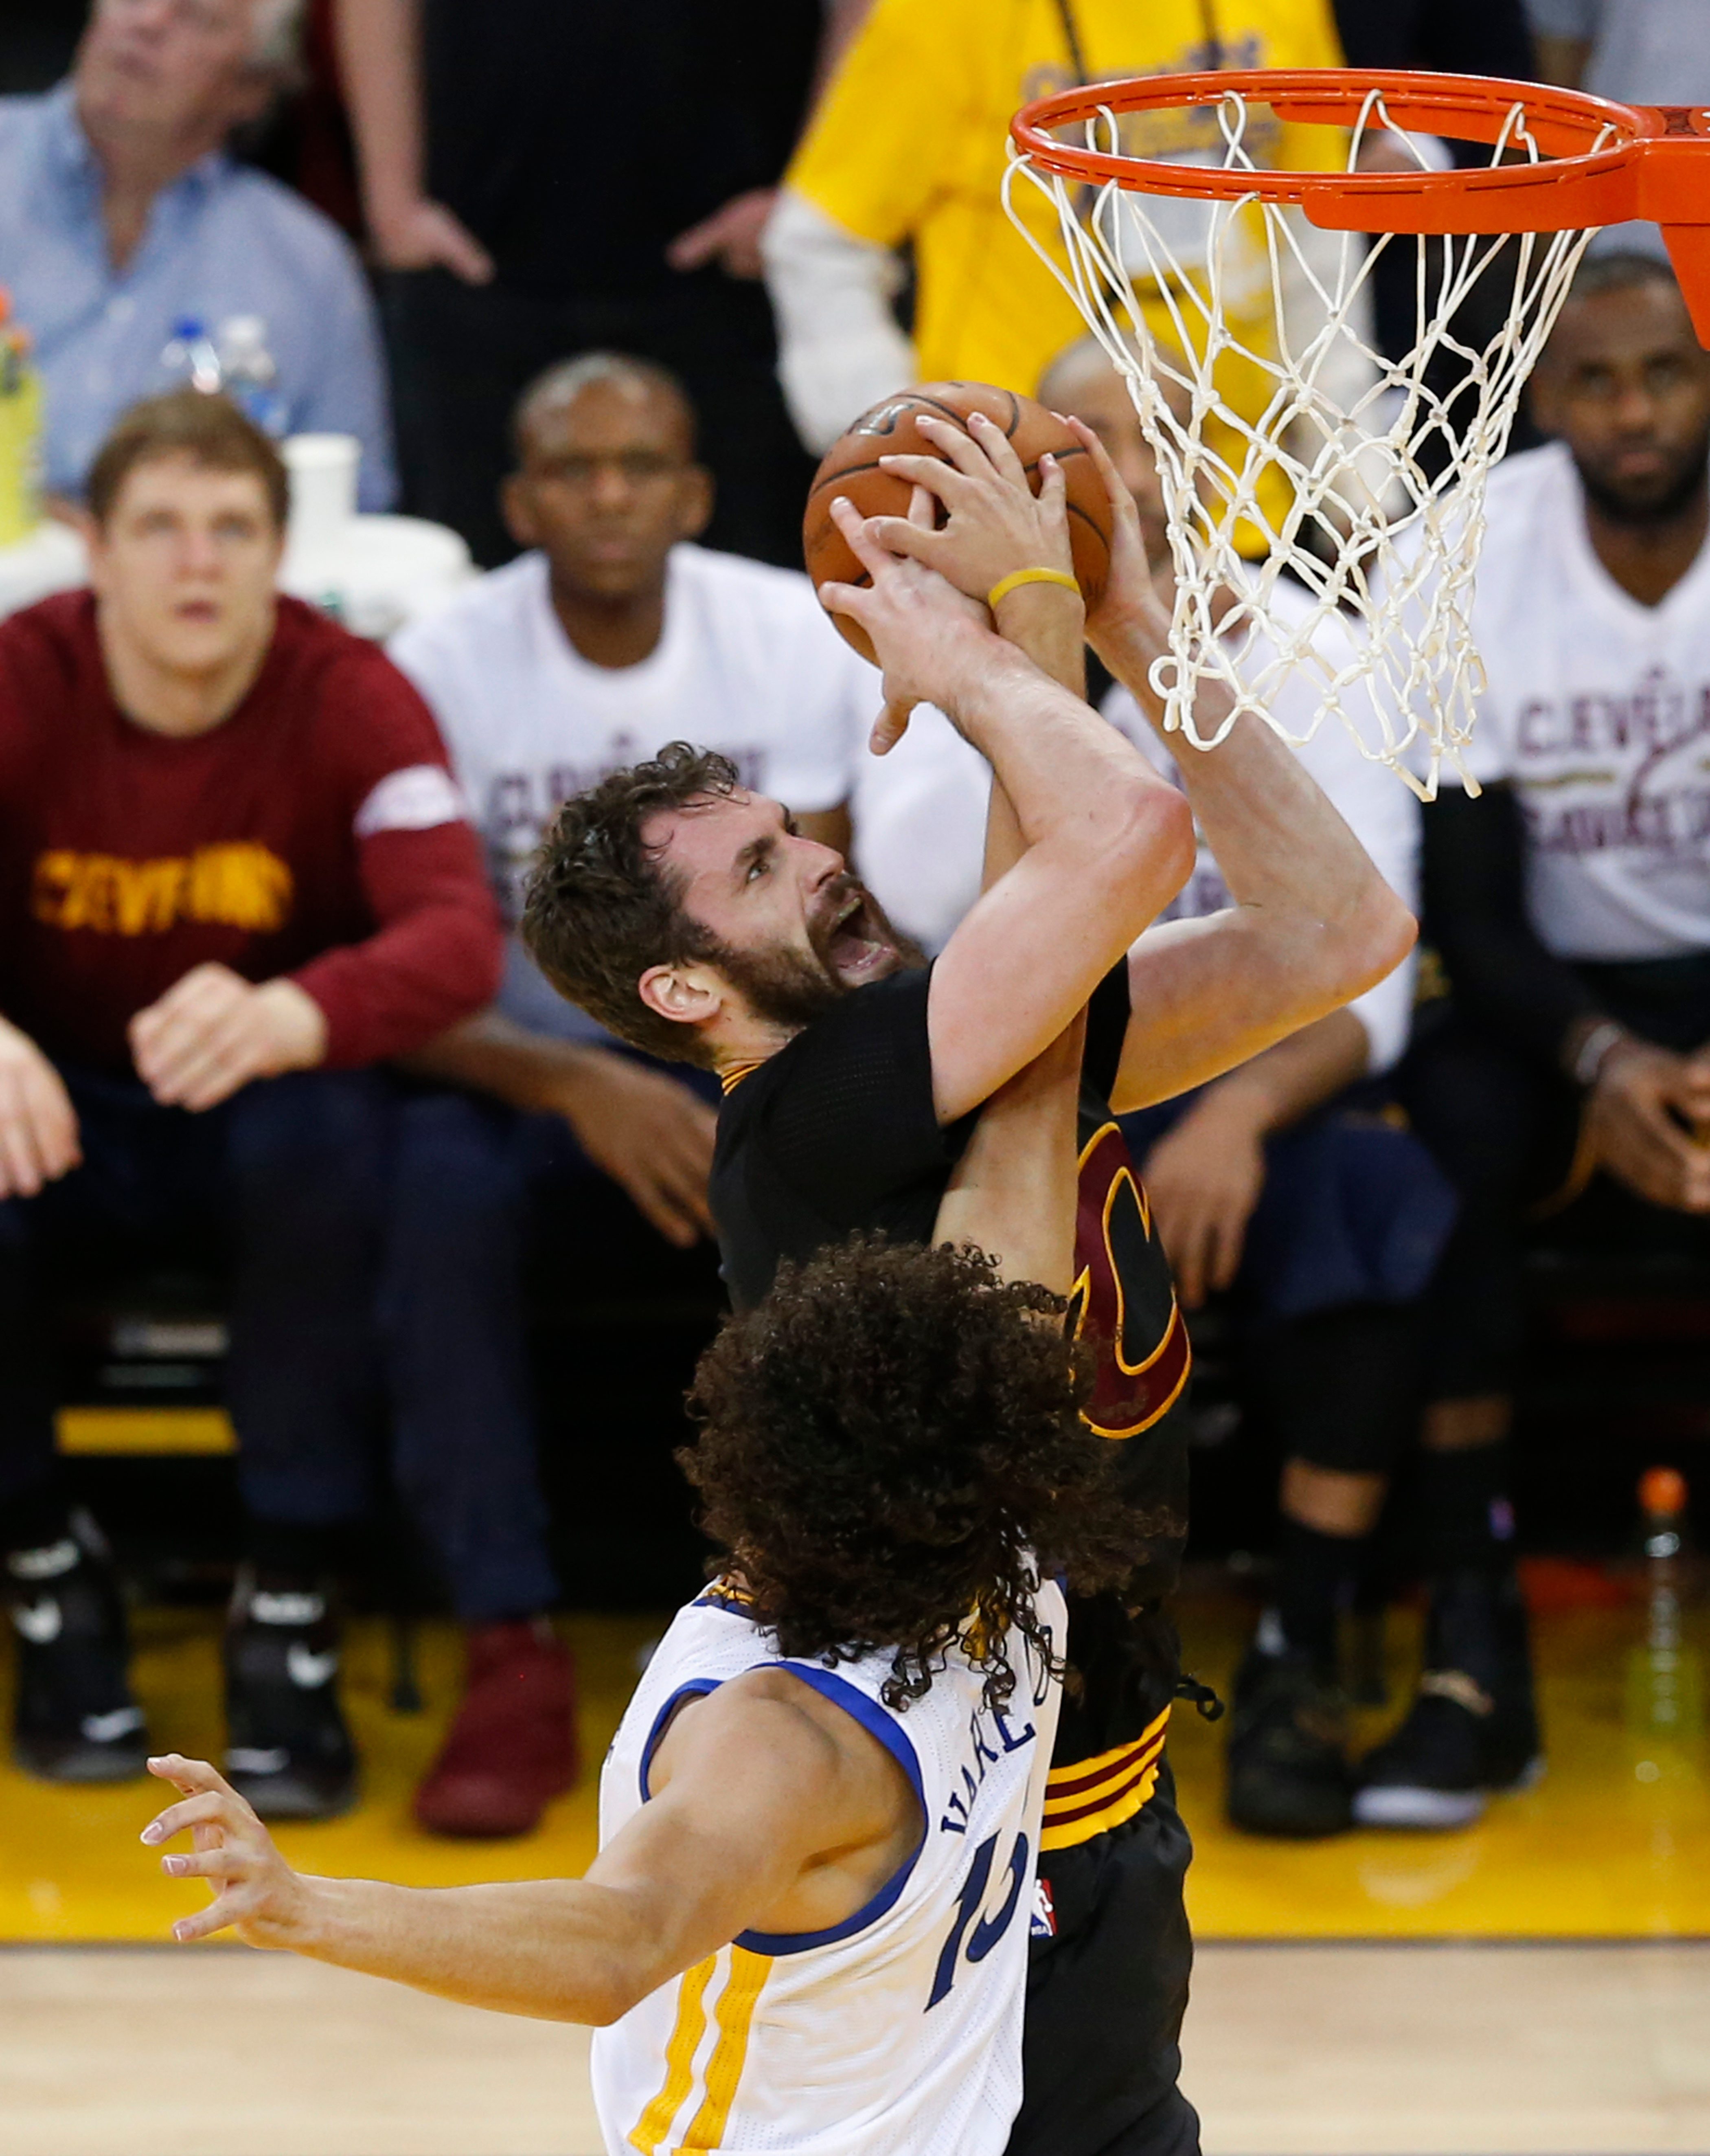 LOVE. Cleveland Cavaliers' forward Kevin Love (top) goes against Golden State Warriors' forward Anderson Varejao (bottom) during the first half of the NBA Finals. EPA/JOHN G. MABANGLO CORBIS OUT 